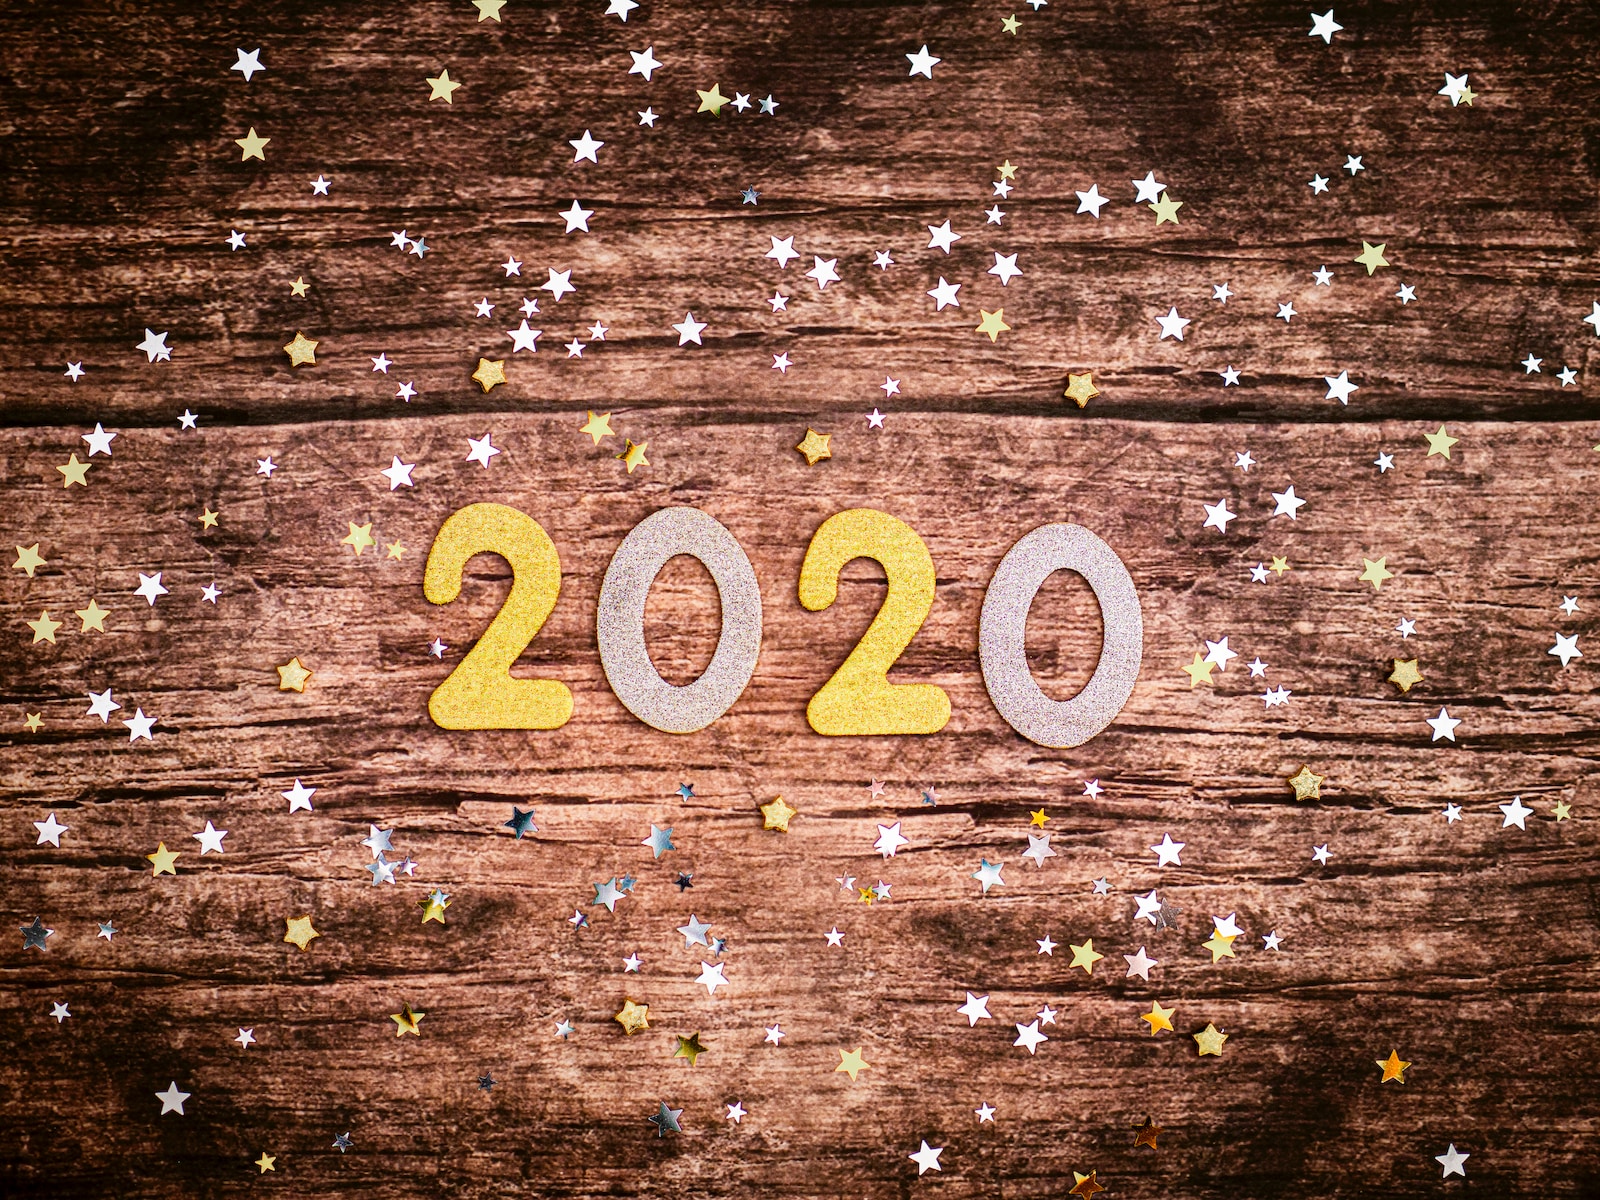 4 Predictions For The Marijuana Industry In 2020